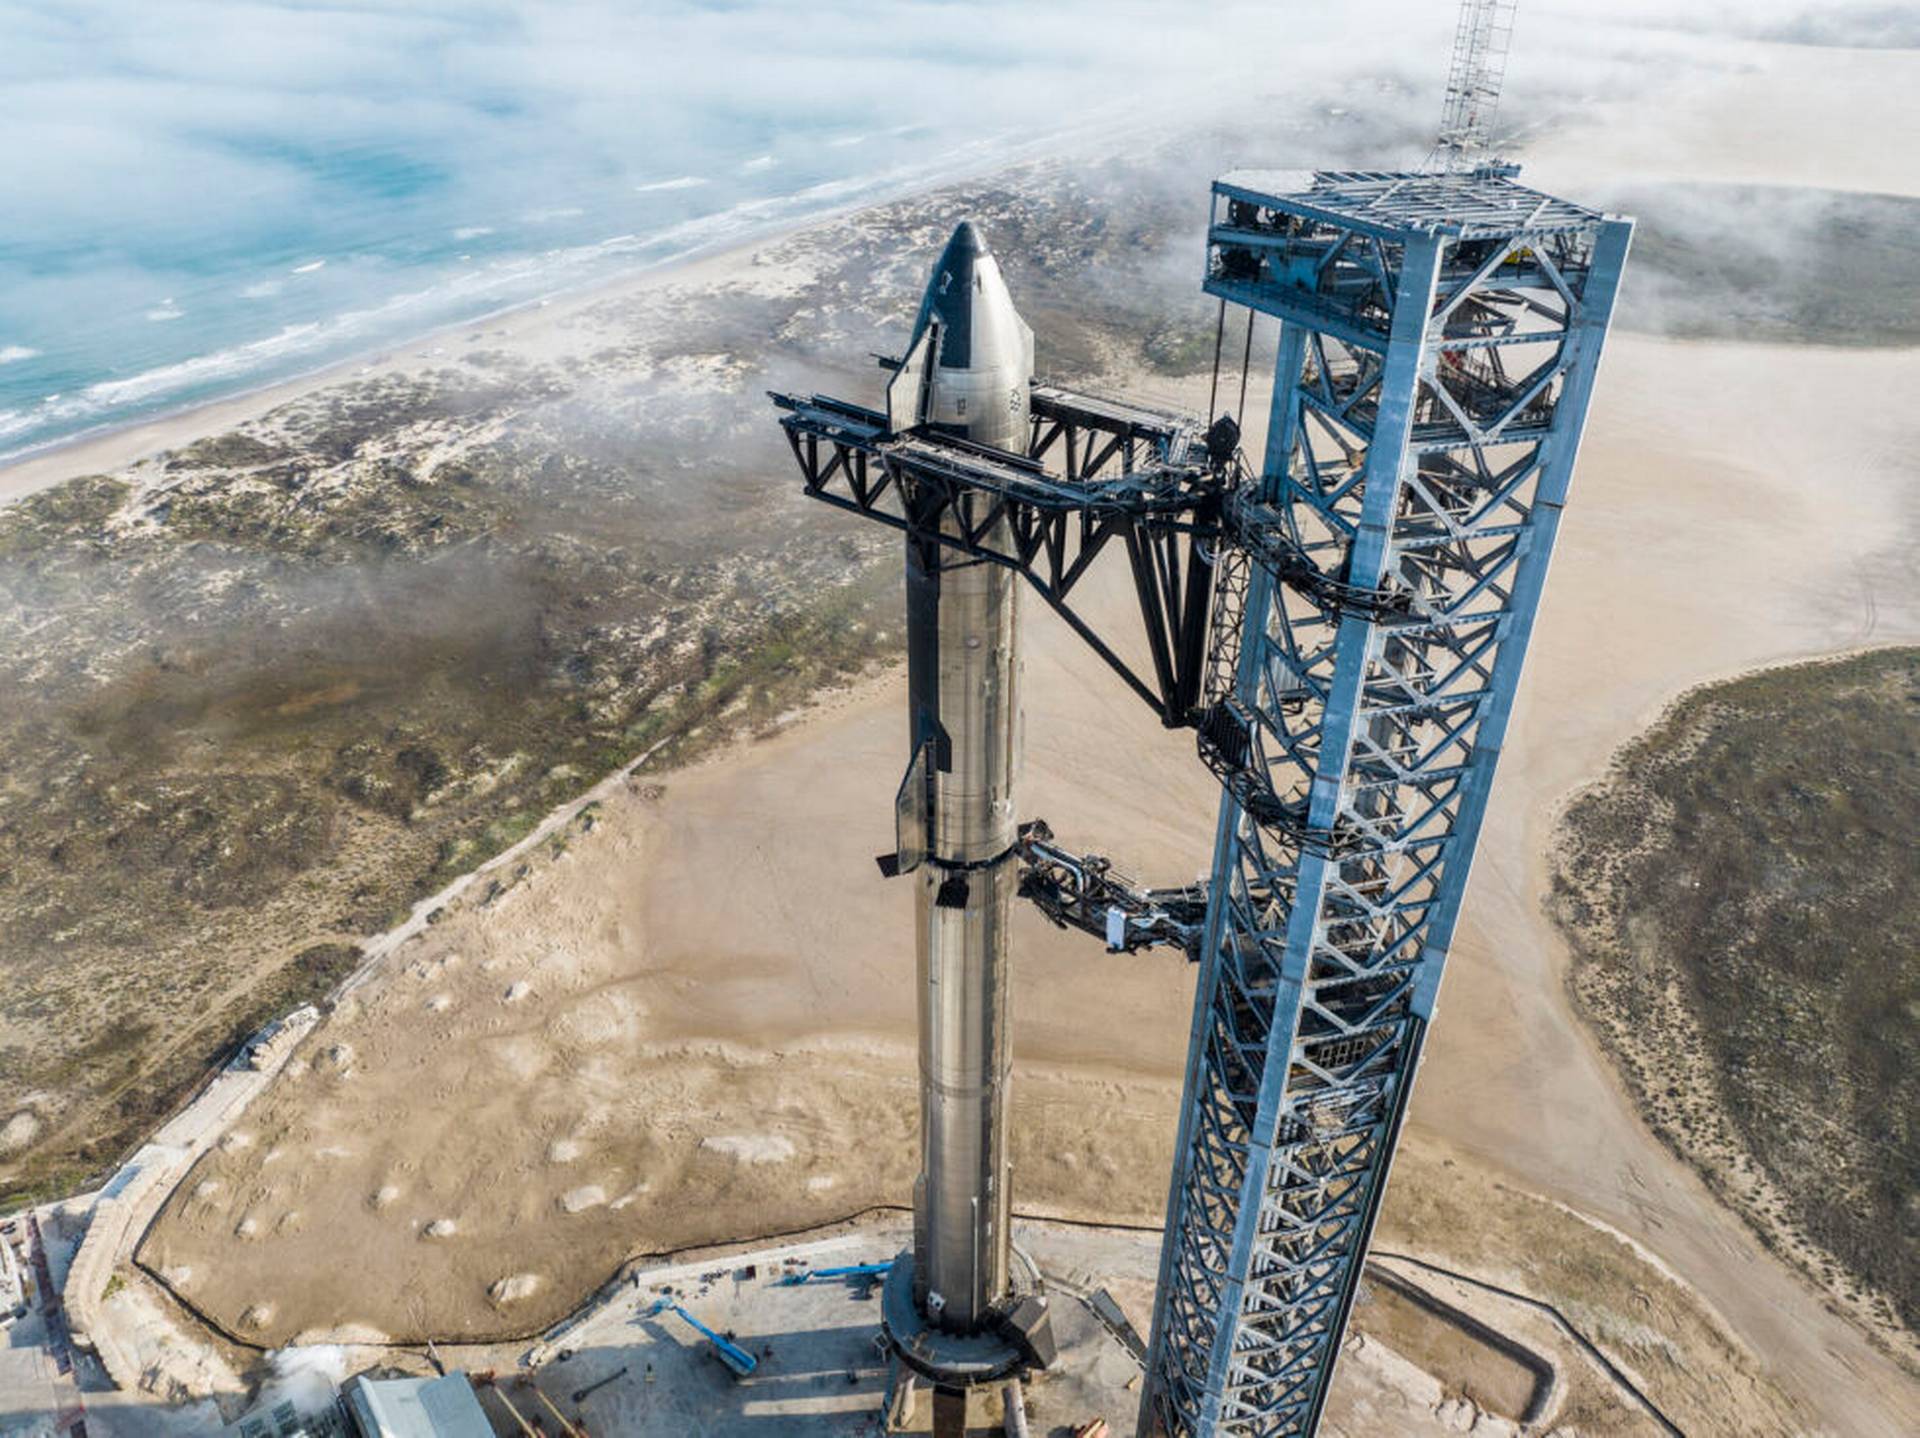 Spacex has conducted a “cold countdown” with the refueling of Starship